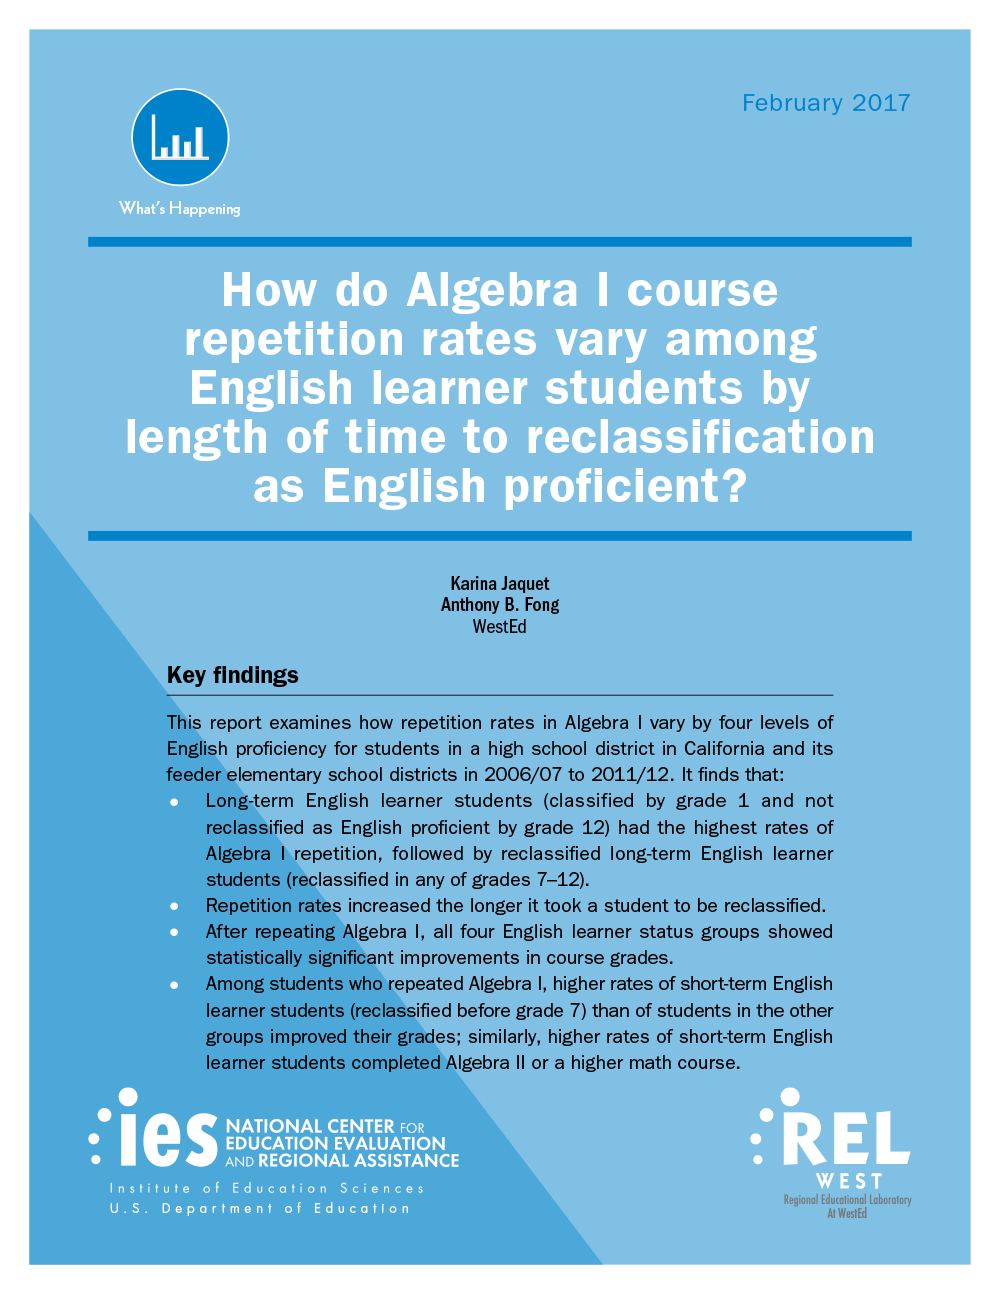 How do Algebra I course repetition rates vary among English learner students by length of time to reclassification as English proficient?